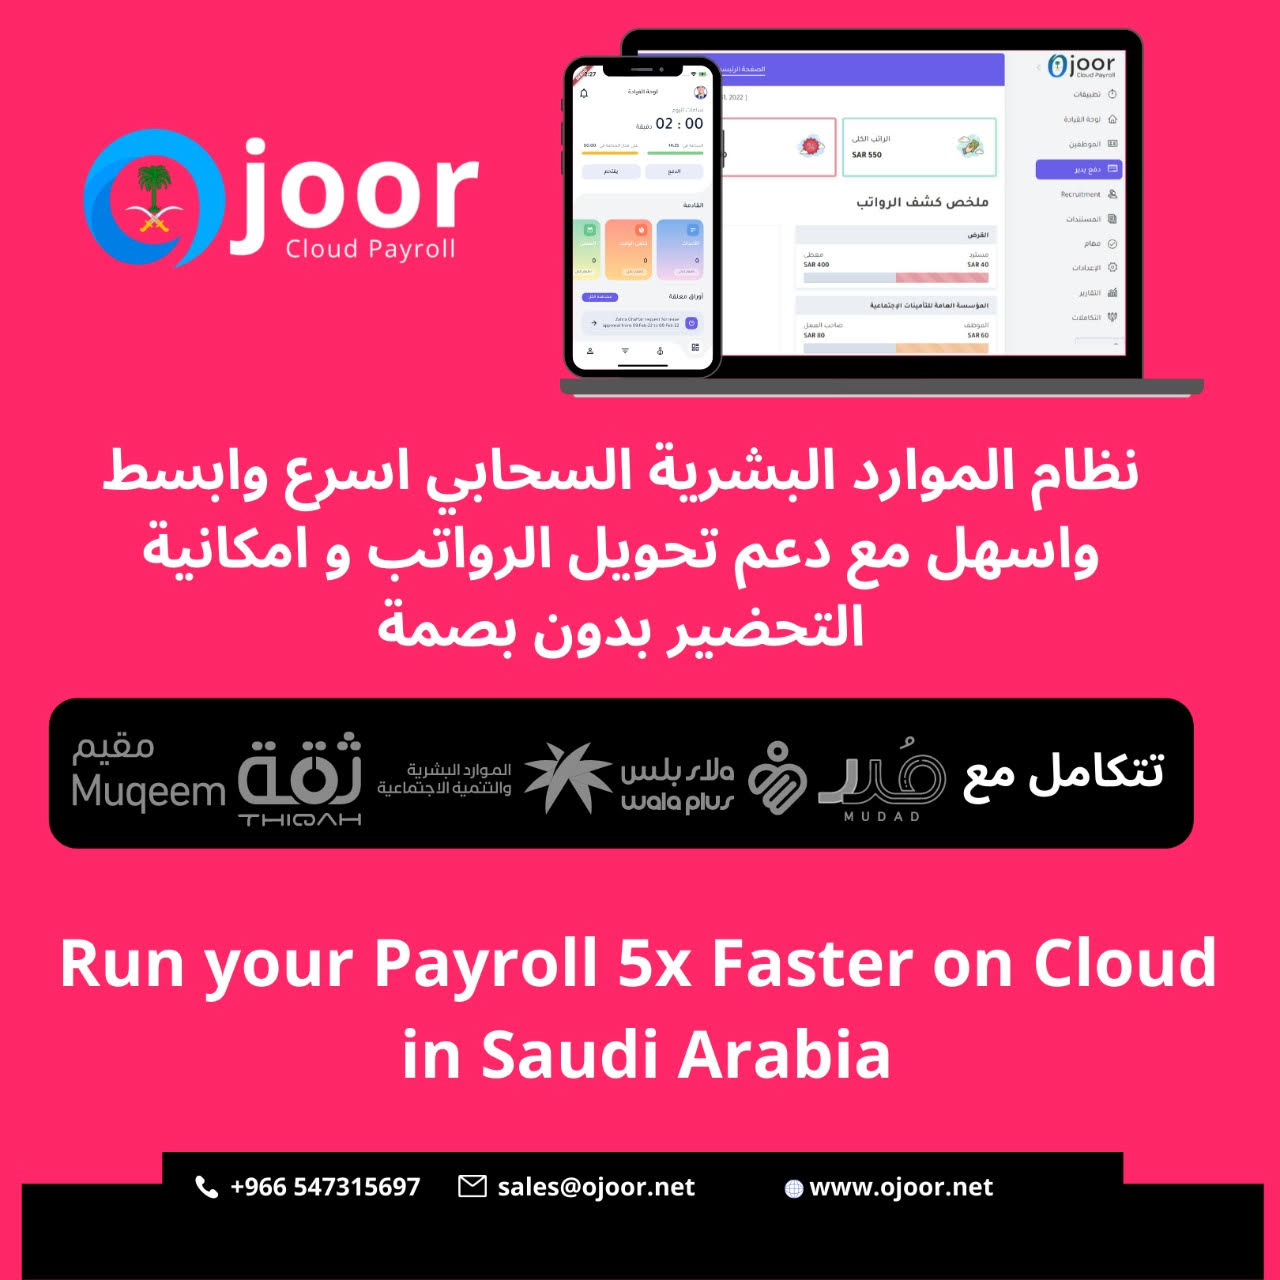 Is it possible to integrate the Payroll Software in Saudi Arabia?